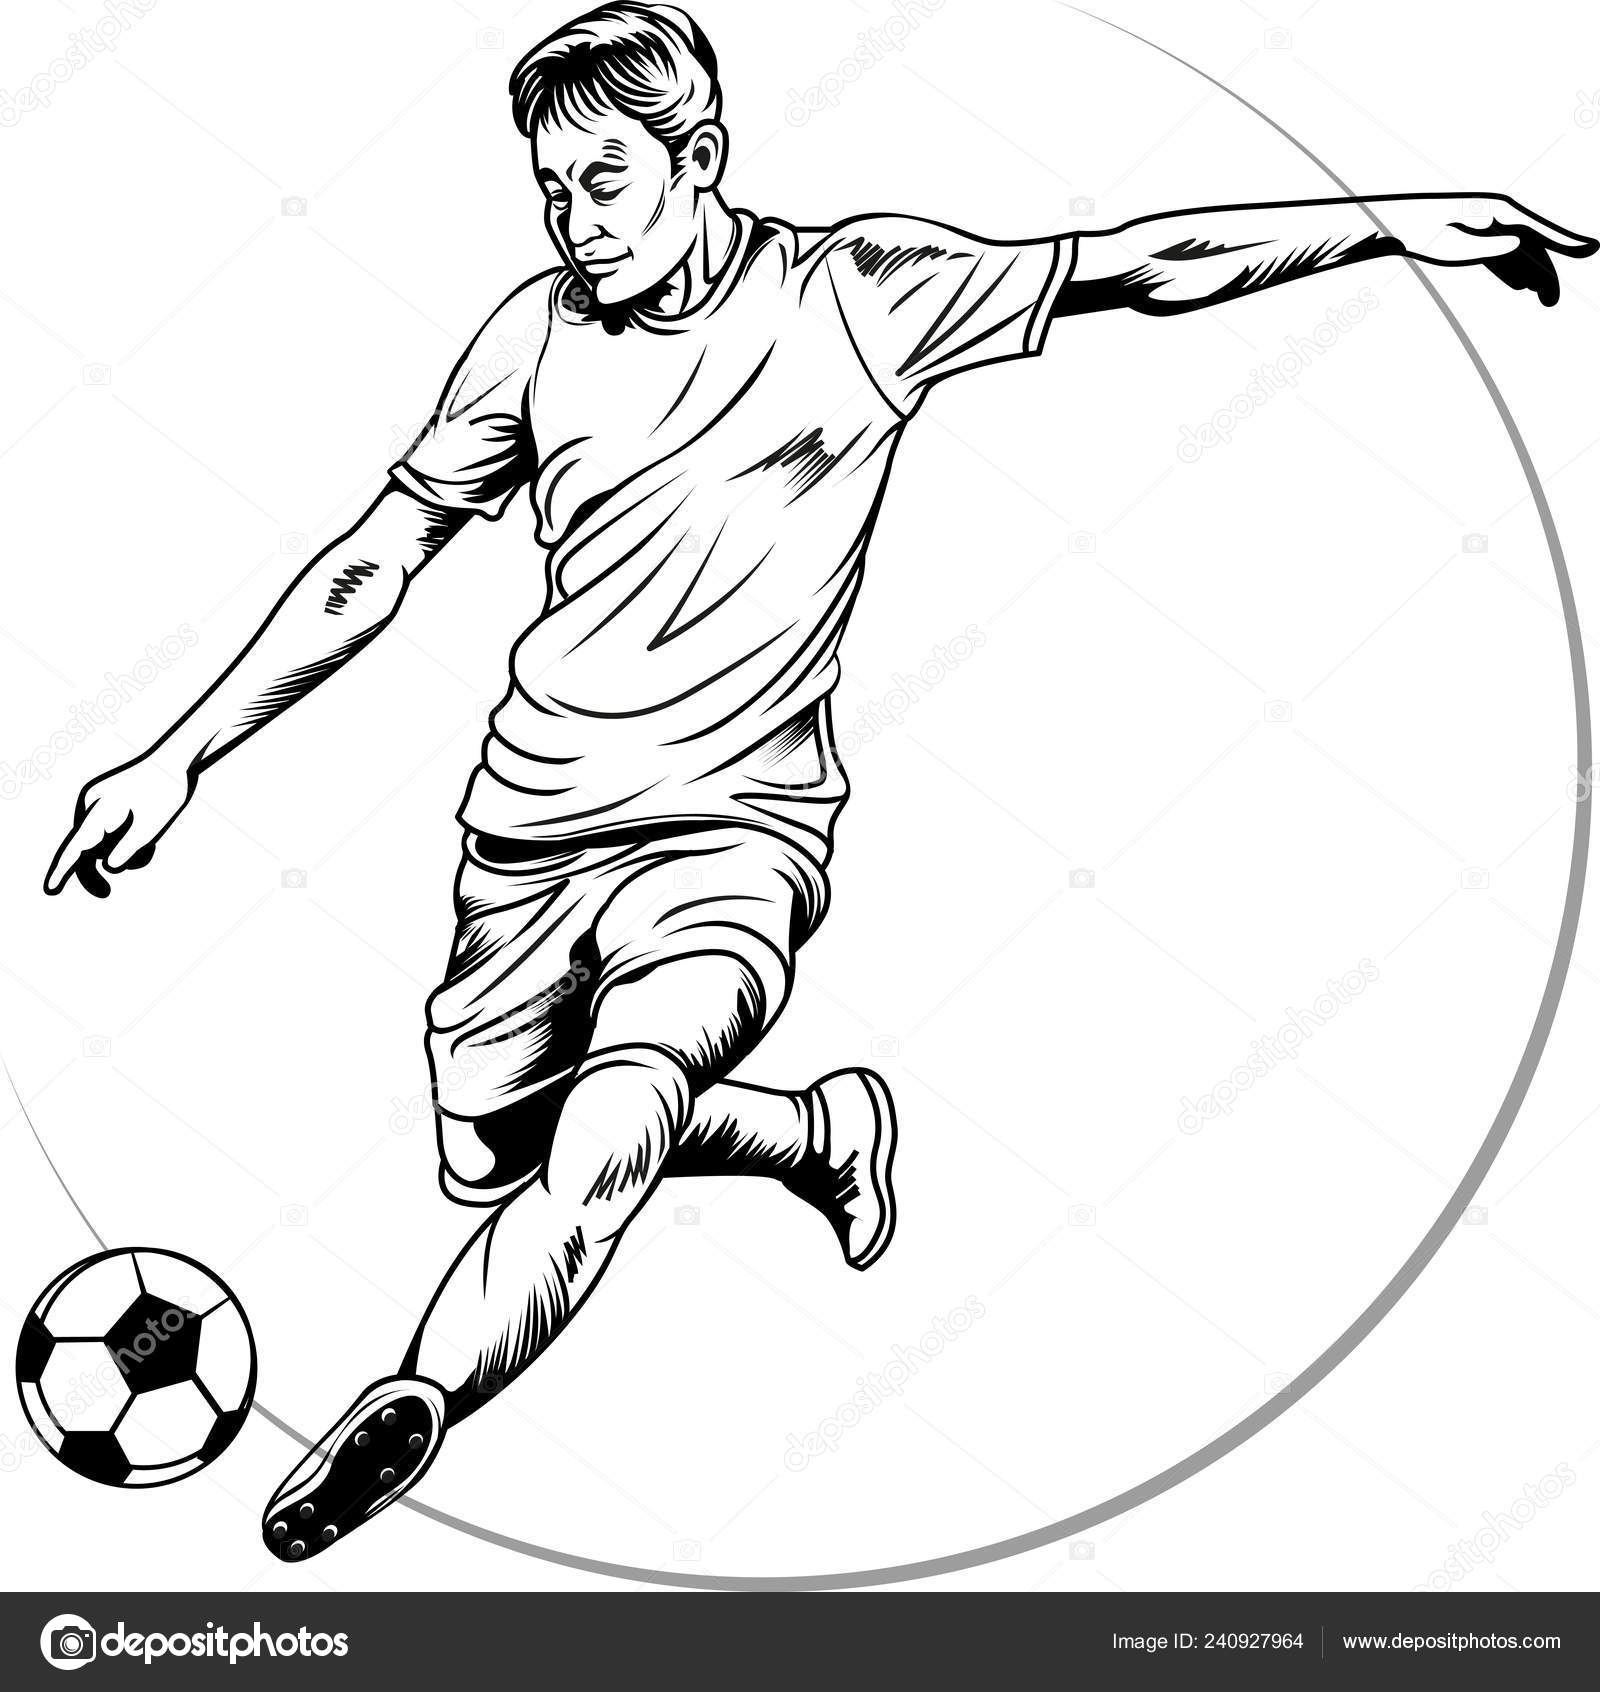 cool football drawing easy - Clip Art Library